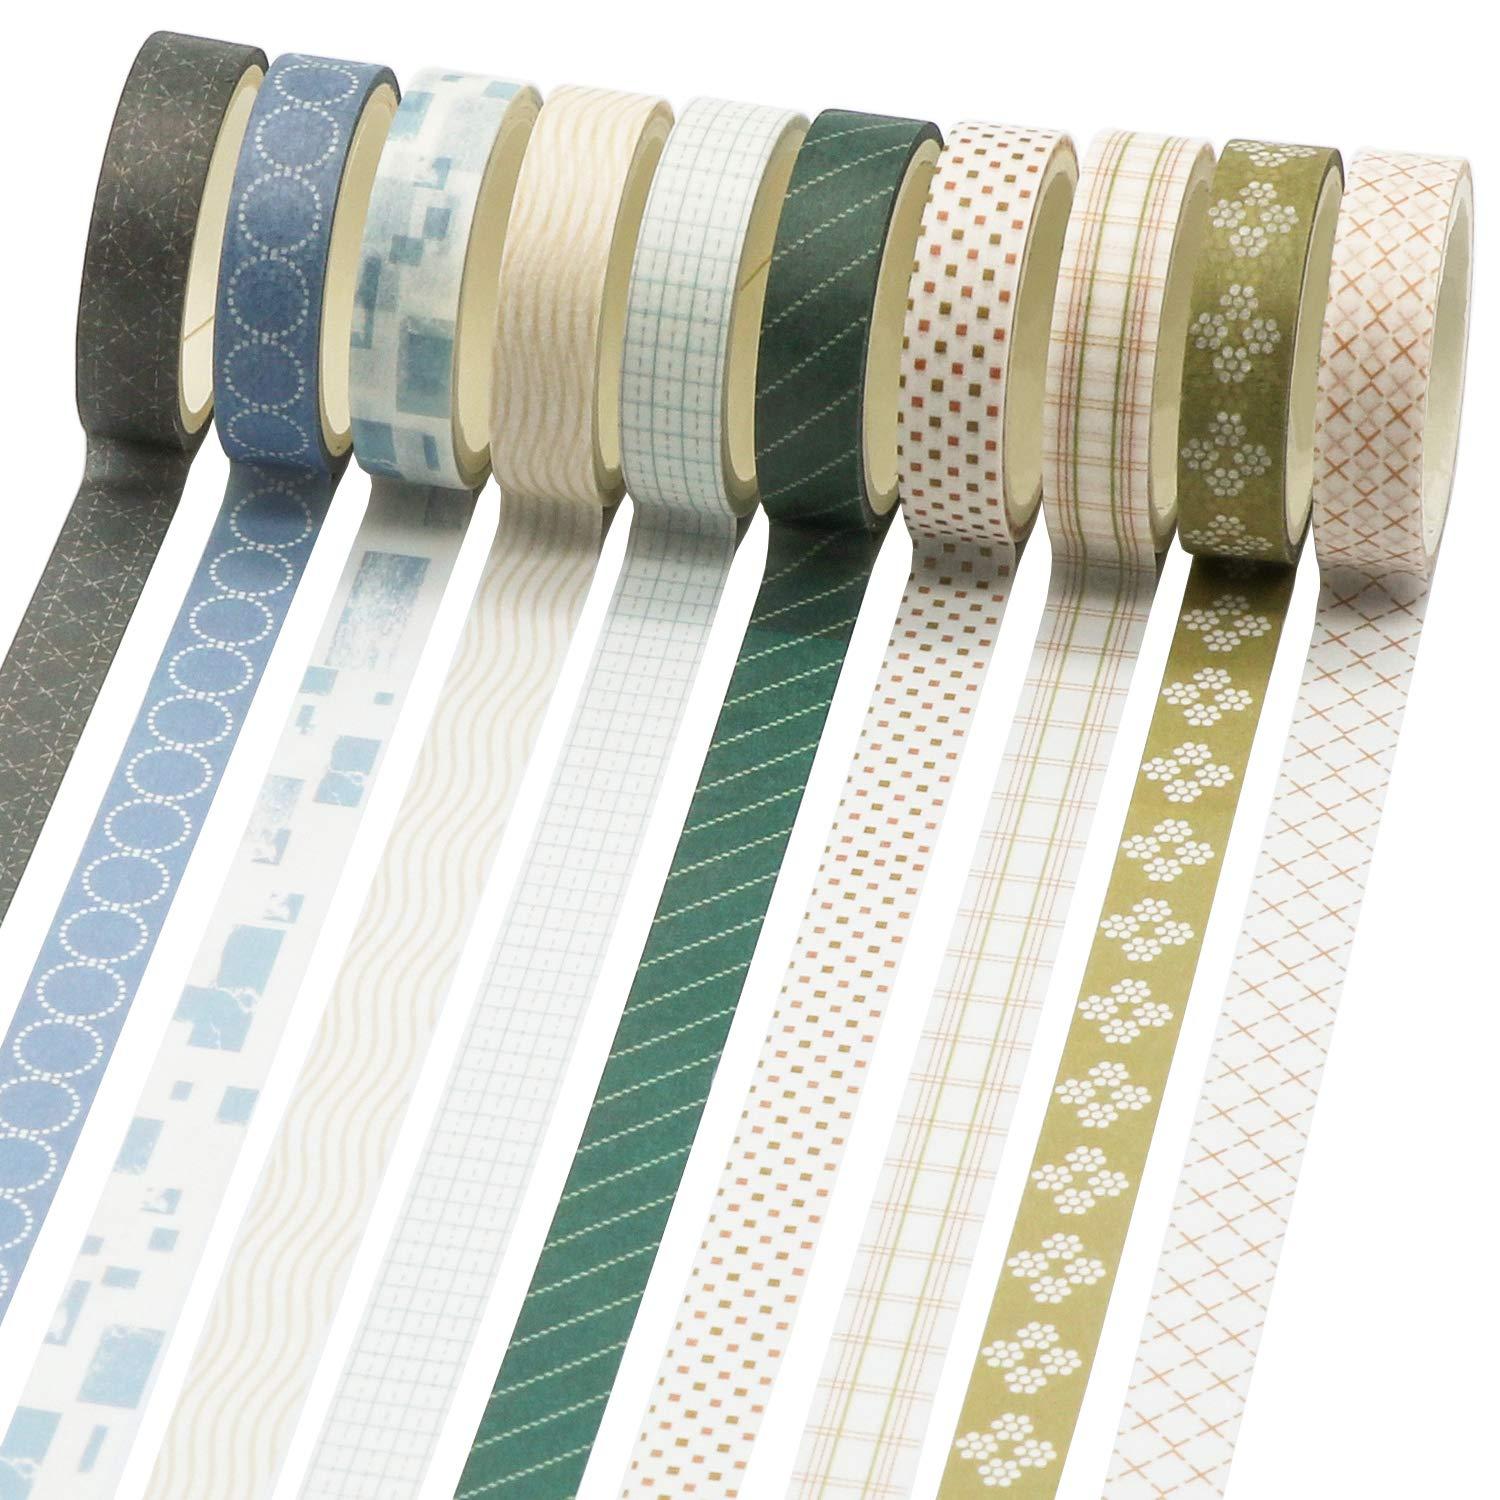  Knaid Vintage Washi Tape Set, Assorted 5 Rolls of Decorative  Colored Masking Tapes for Scrapbooking, DIY Decor and Crafts, Bullet  Journals, Planners, Junk Journal, Gift Wrapping : Arts, Crafts & Sewing